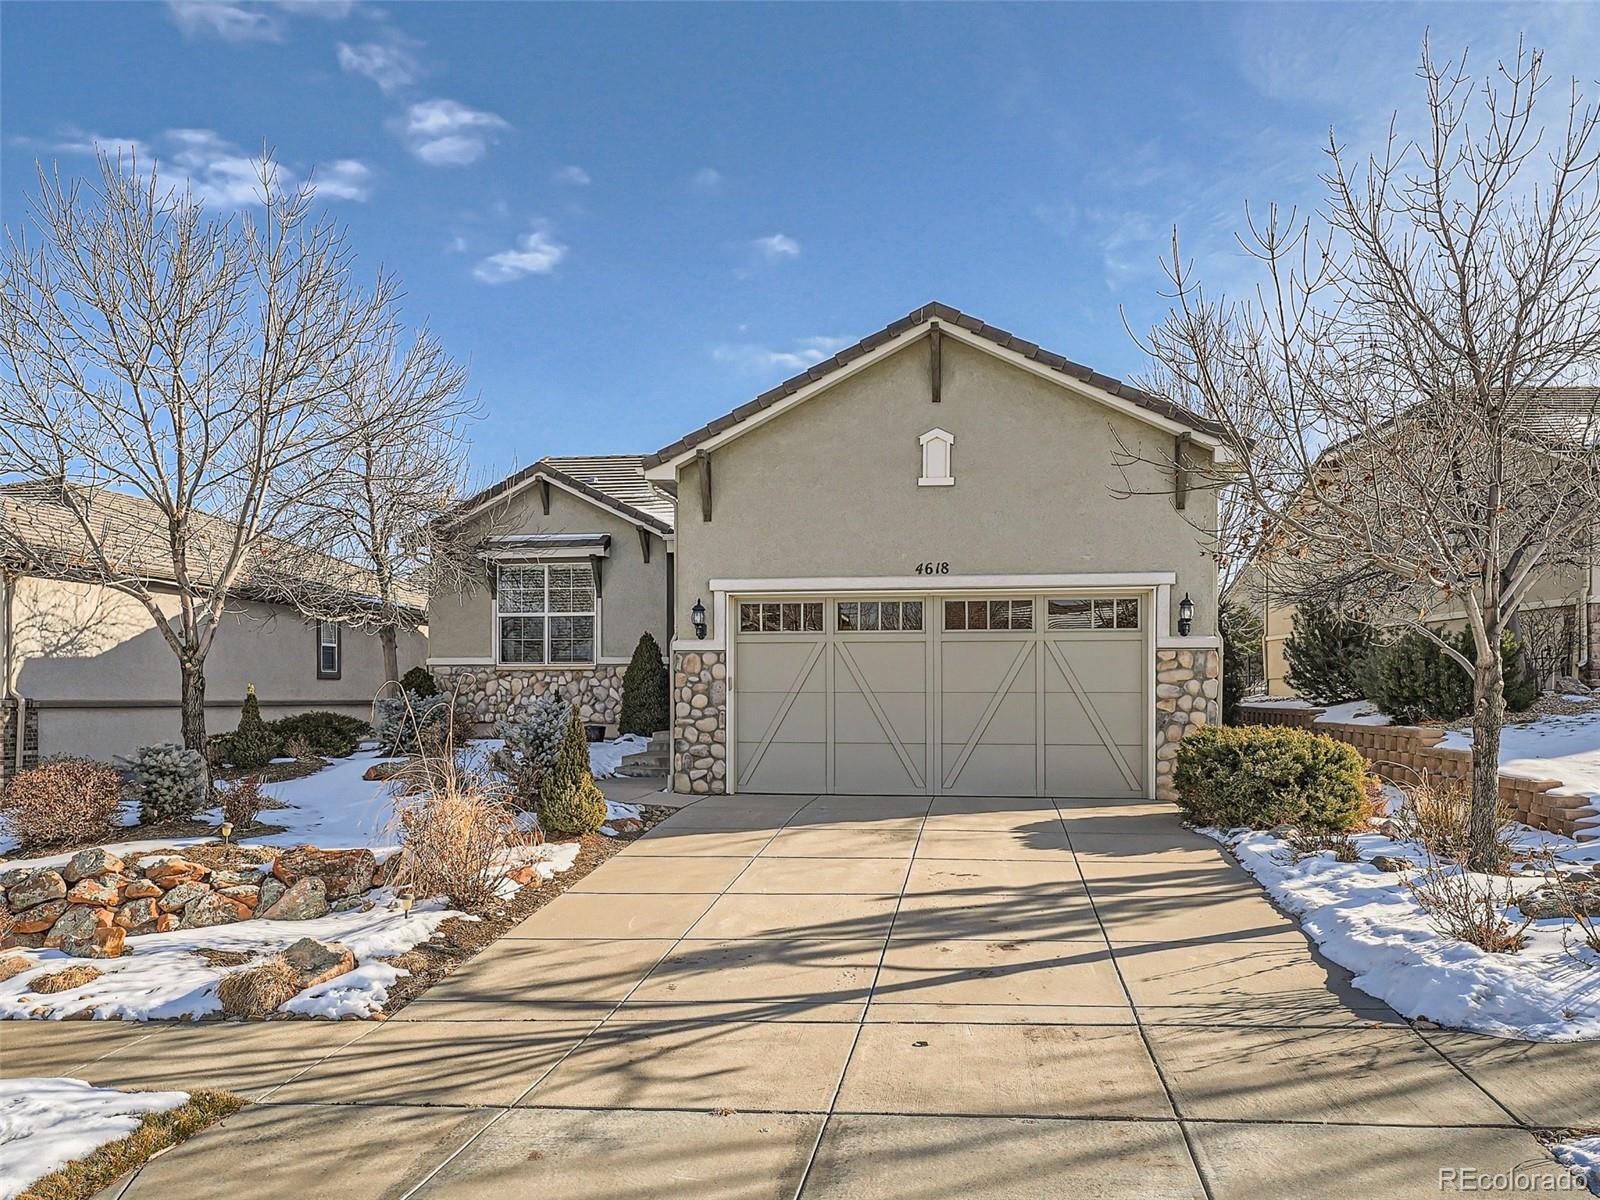 Report Image for 4618  Belford Circle,Broomfield, Colorado